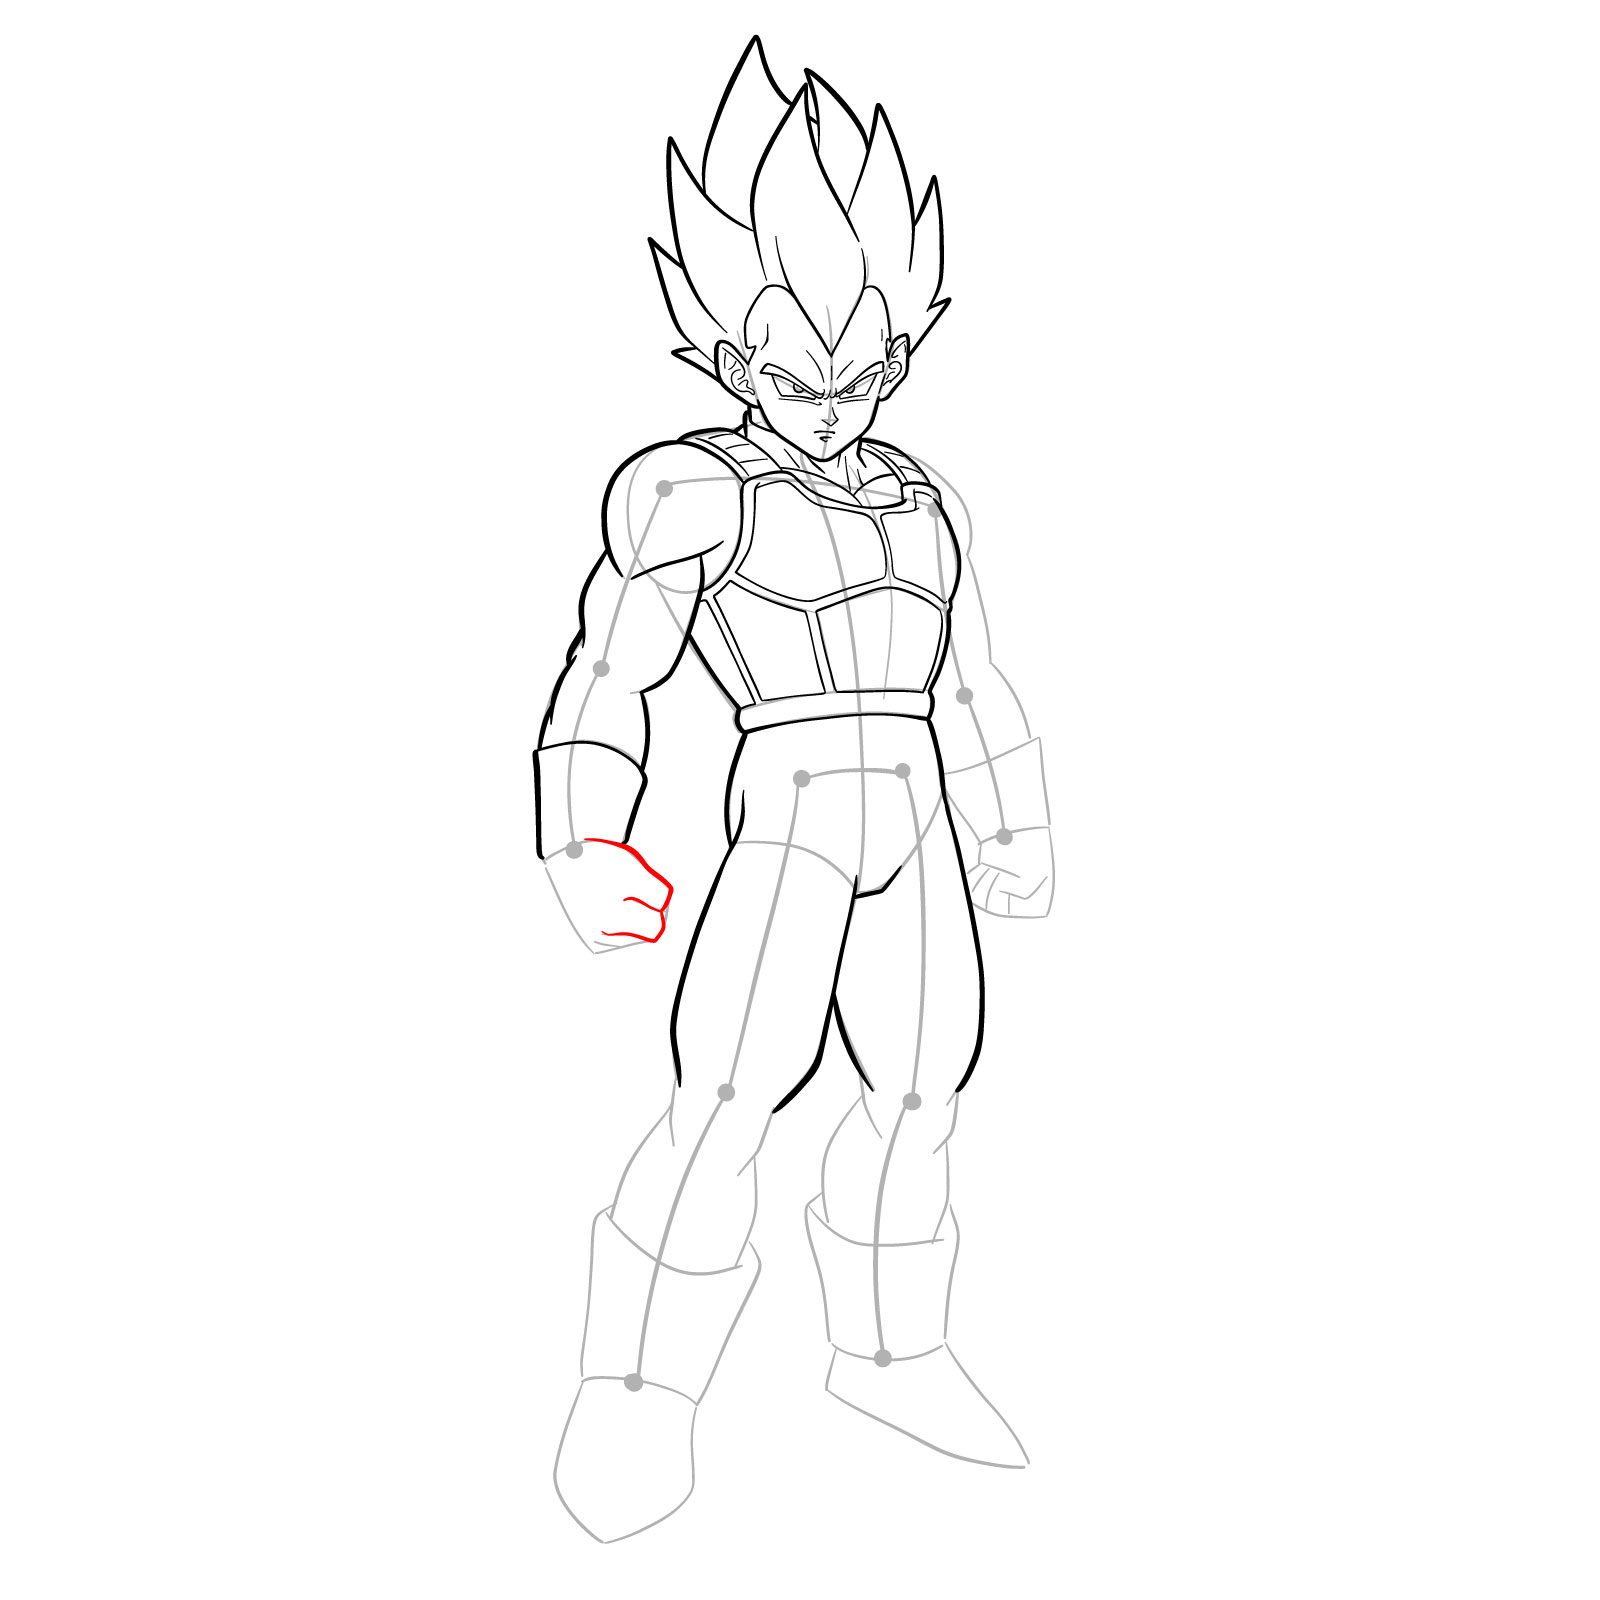 How to draw Vegeta in SSGSS - step 28